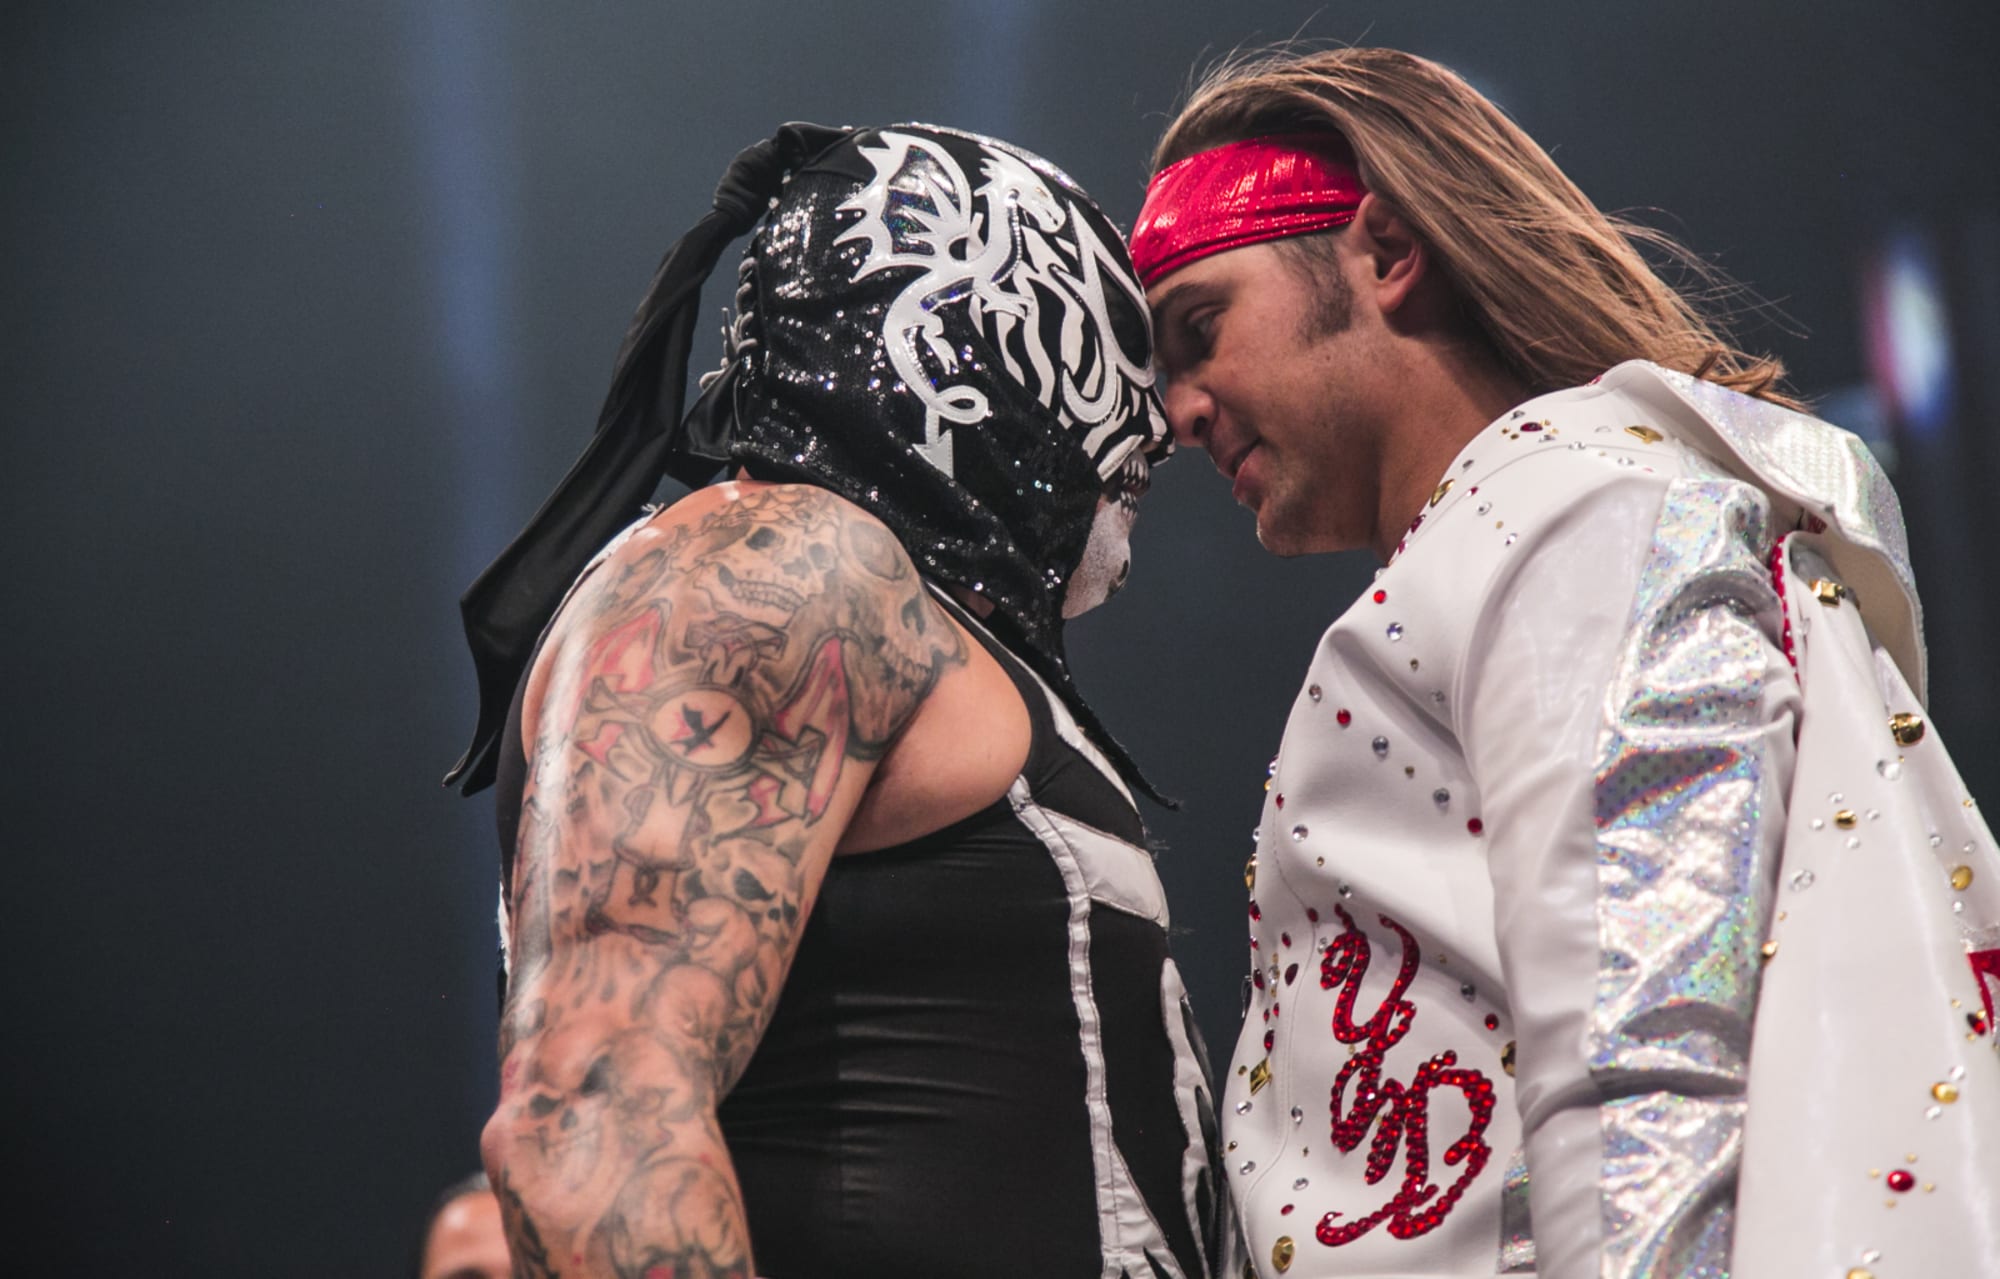 AEW's The Young Bucks reflect on their feud with the Lucha Bros